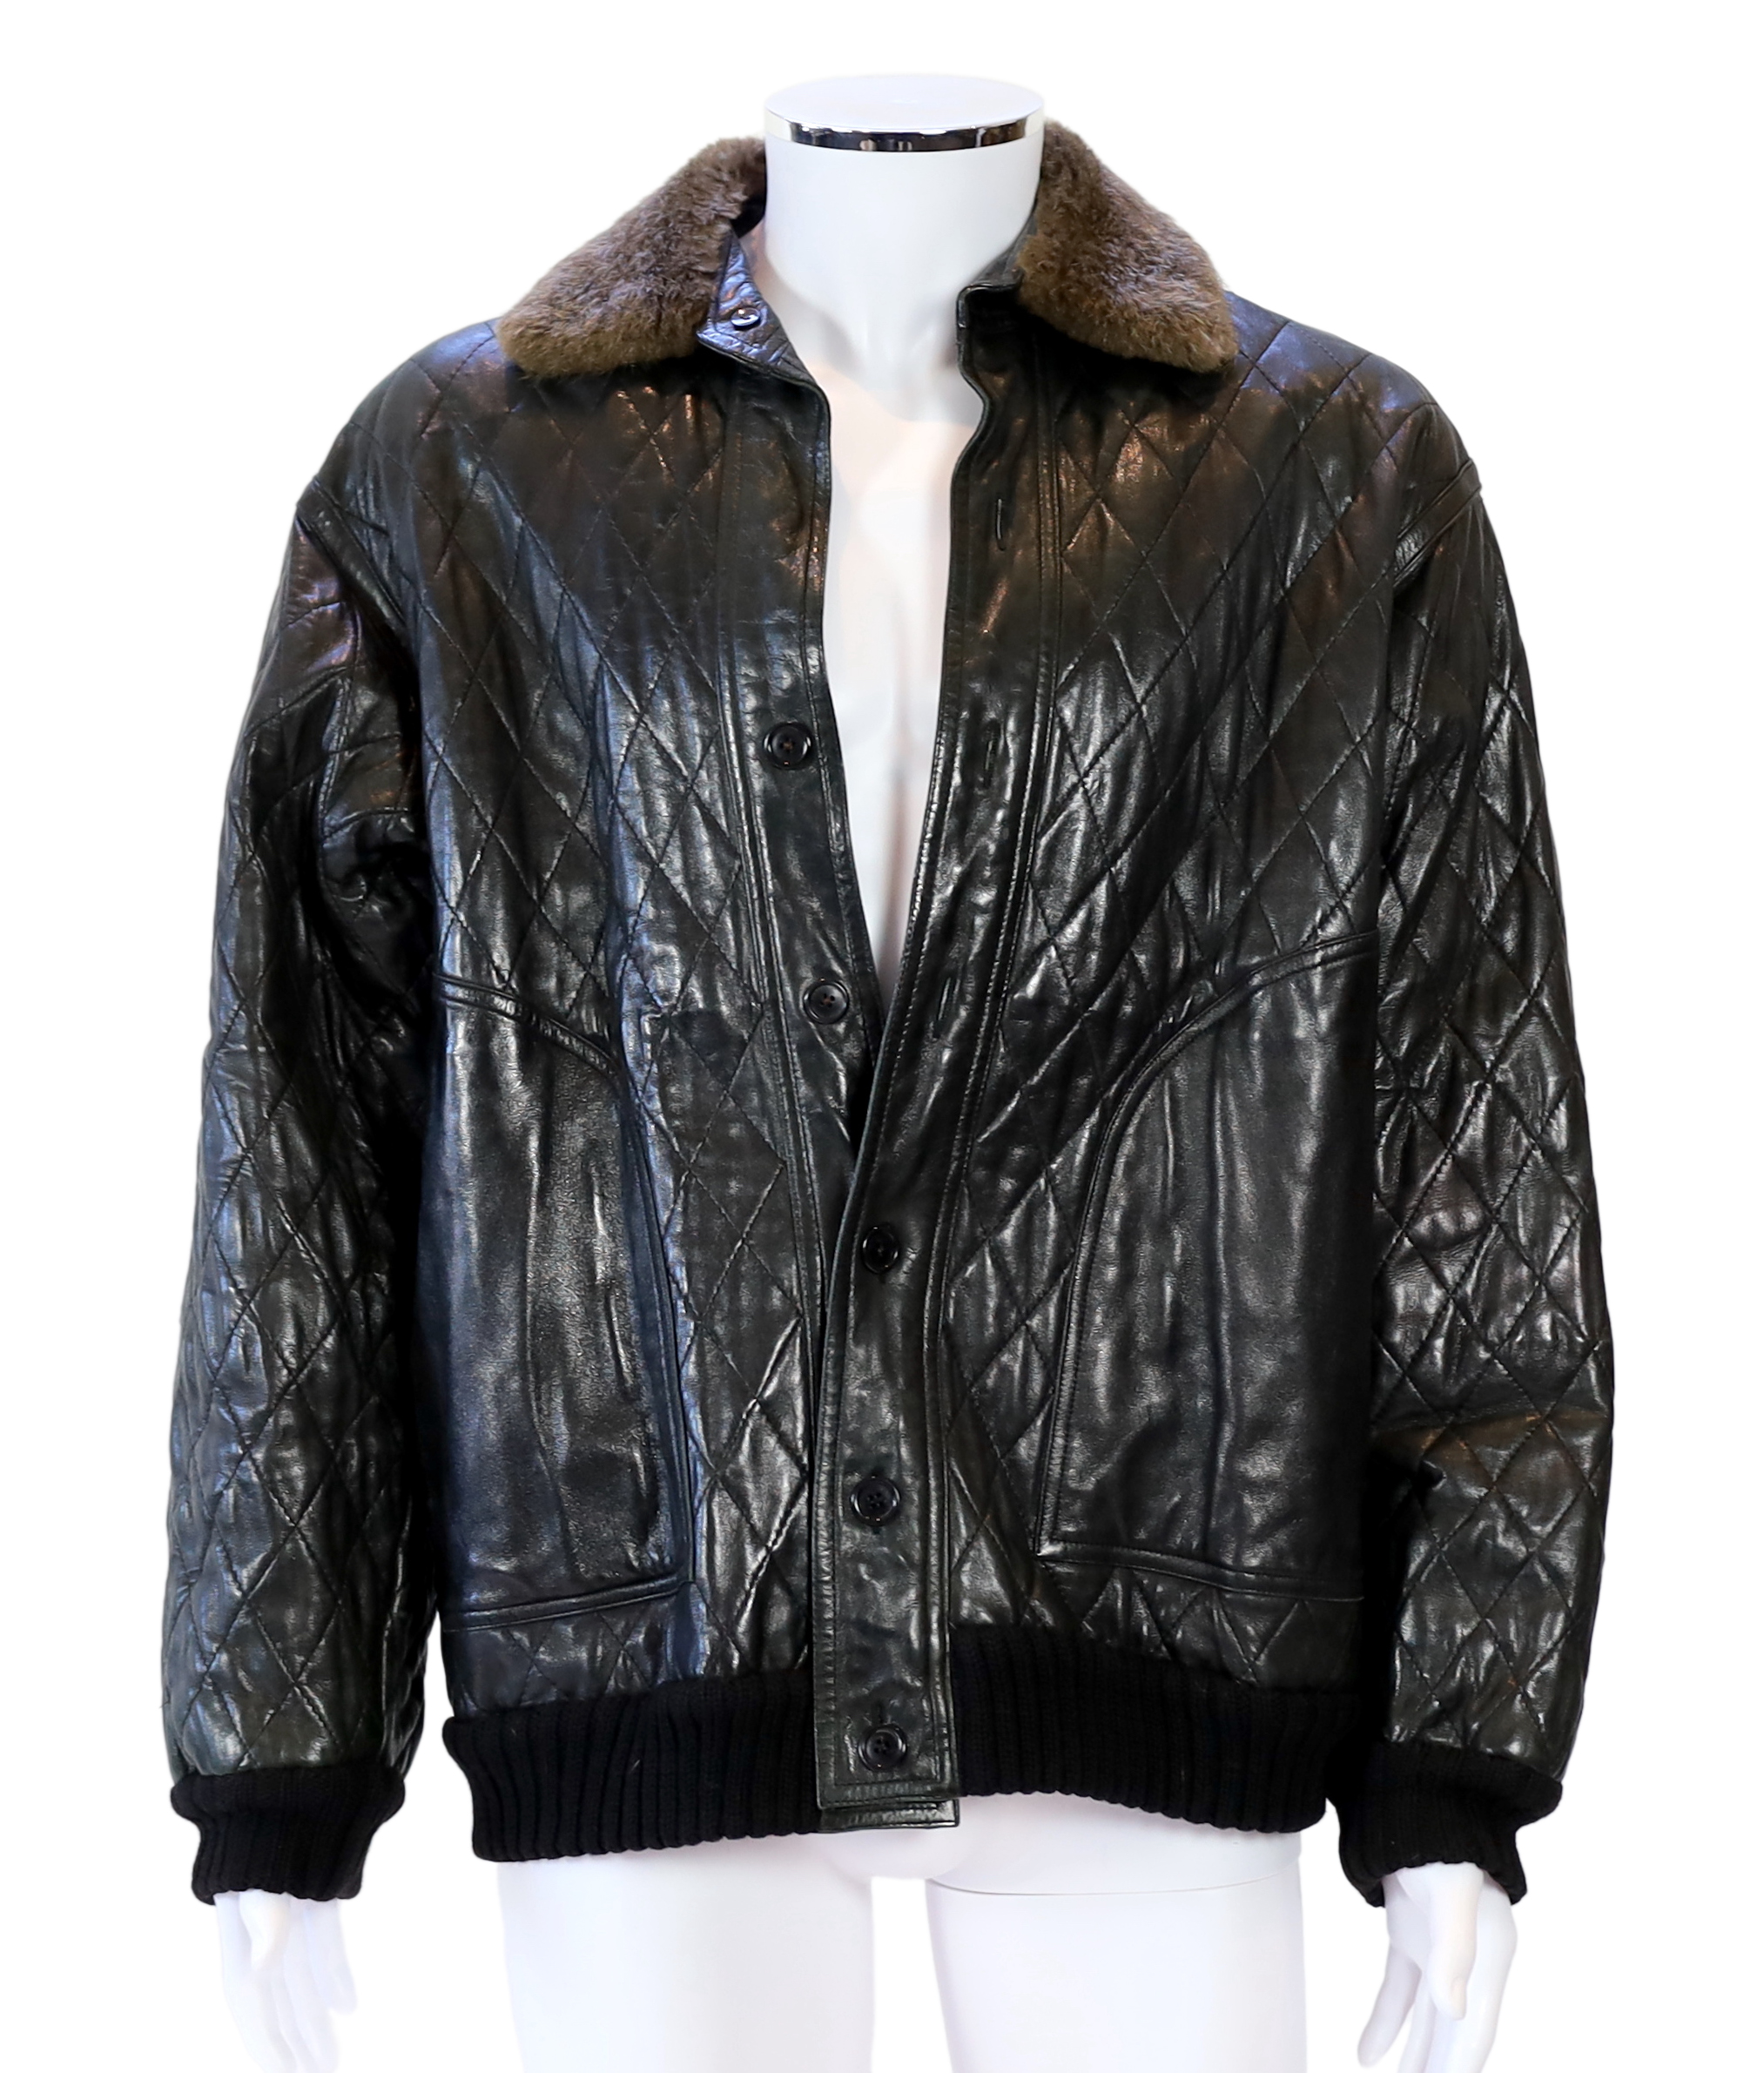 A Yves Saint Laurent Fourrures gentlemen's black quilted leather bomber jacket with fur collar and lining, approx size 42